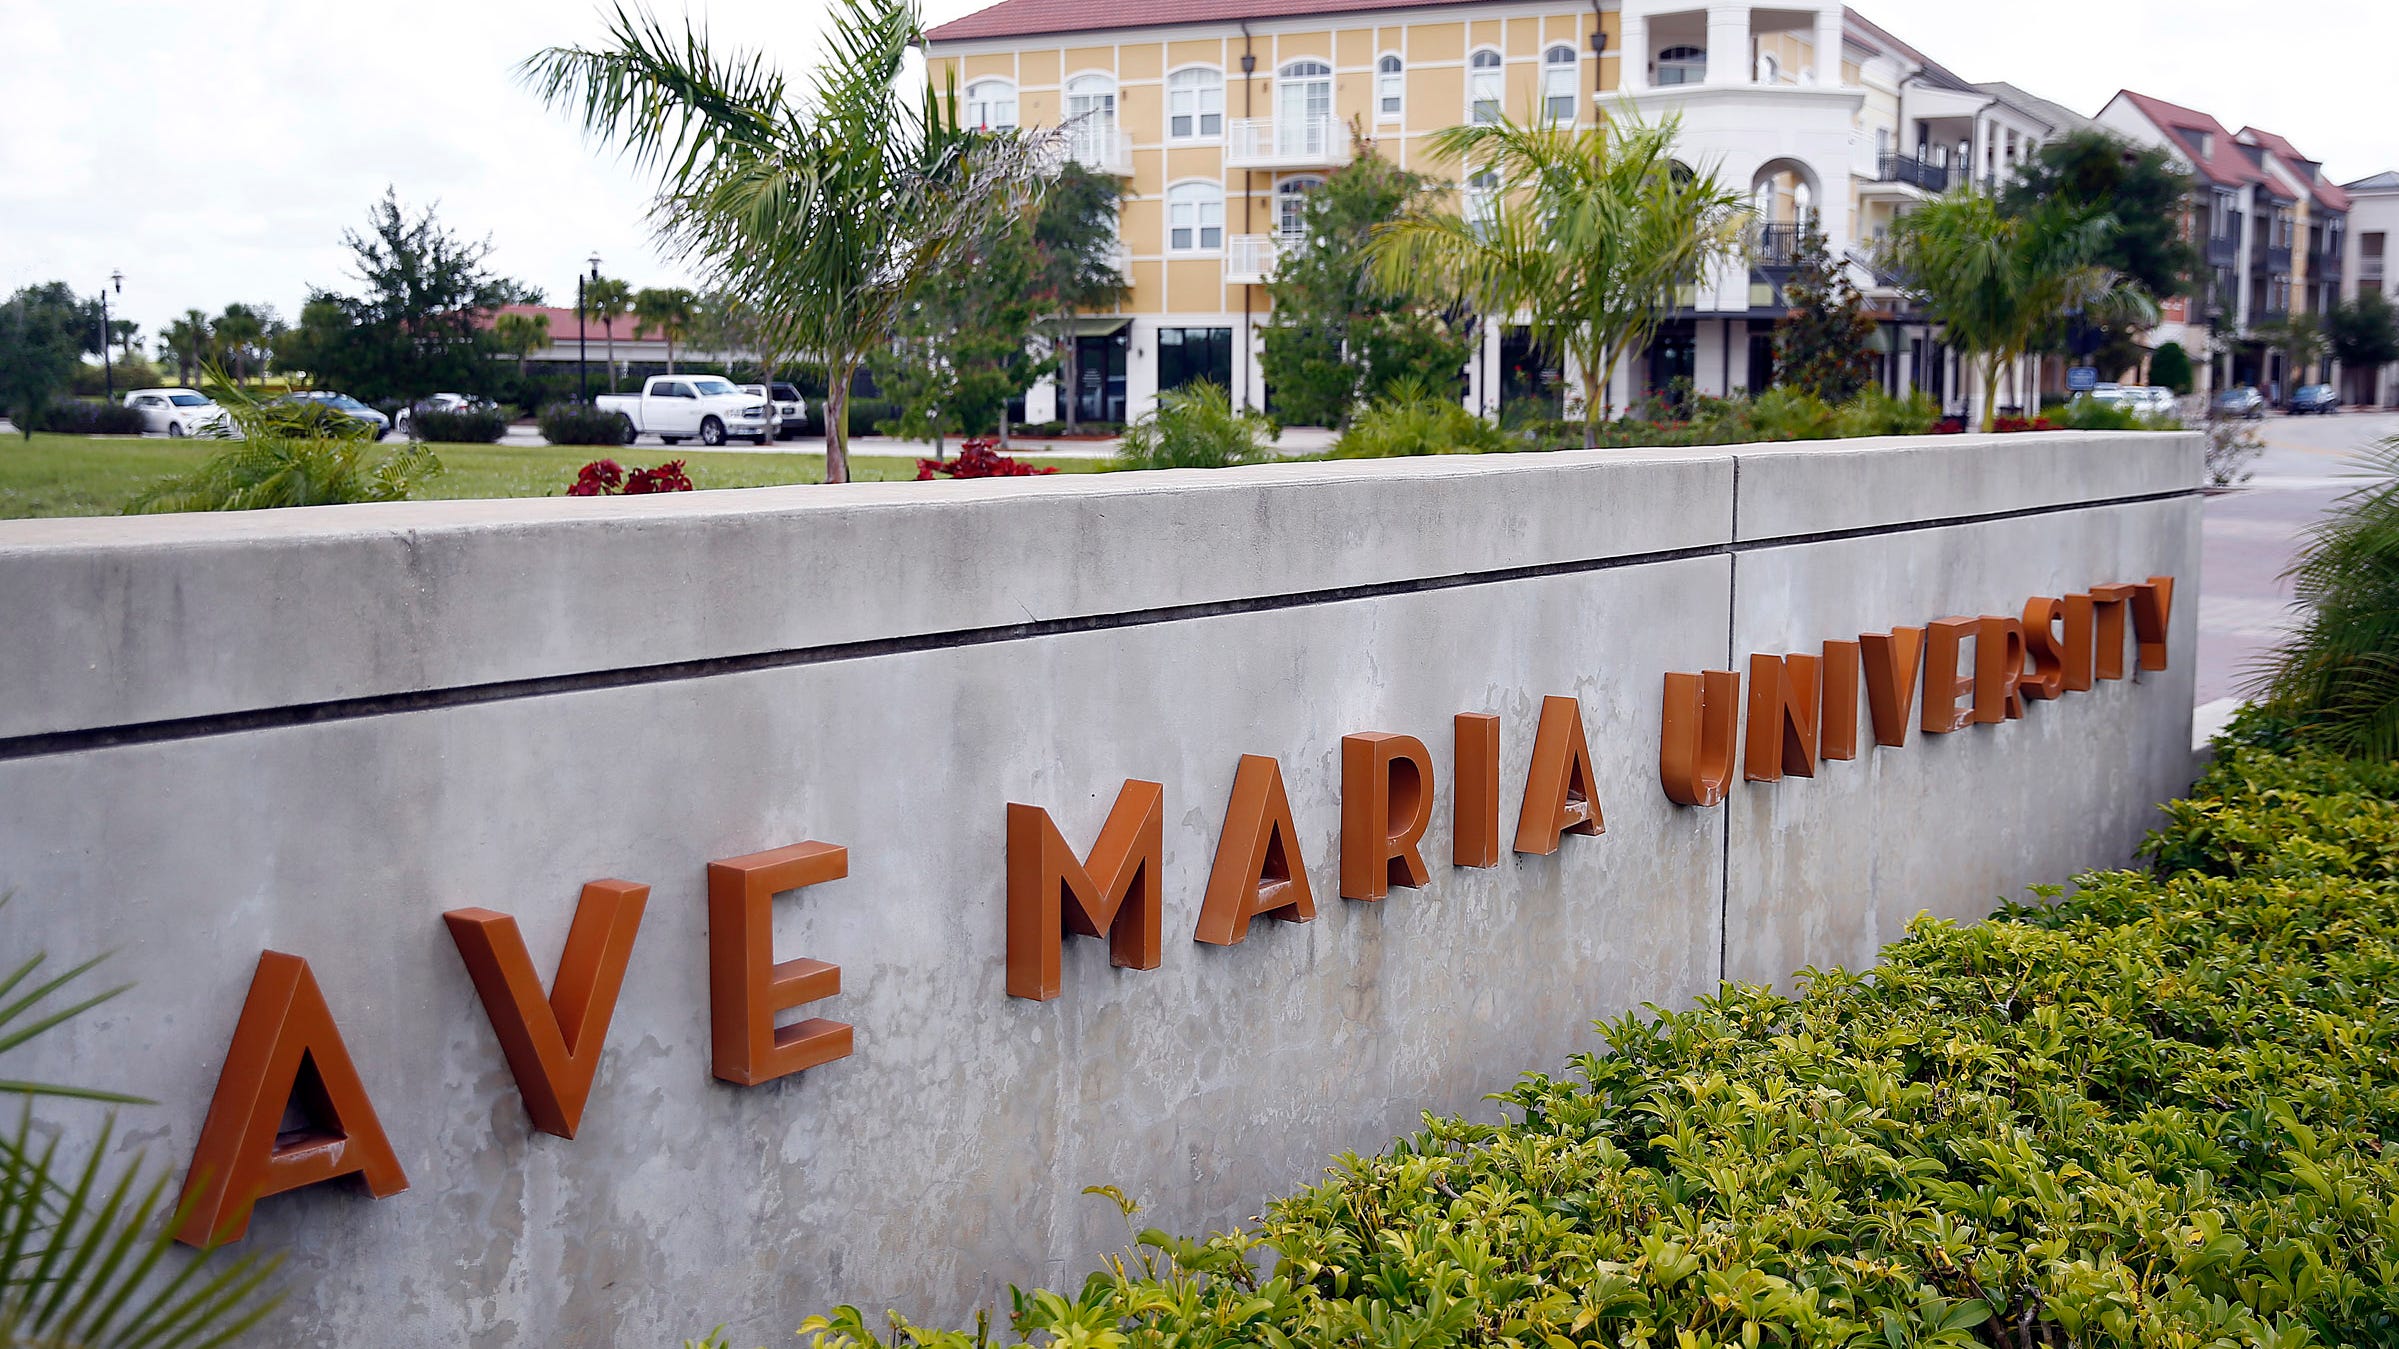 ave-maria-university-settles-in-weeks-after-welcoming-students-back